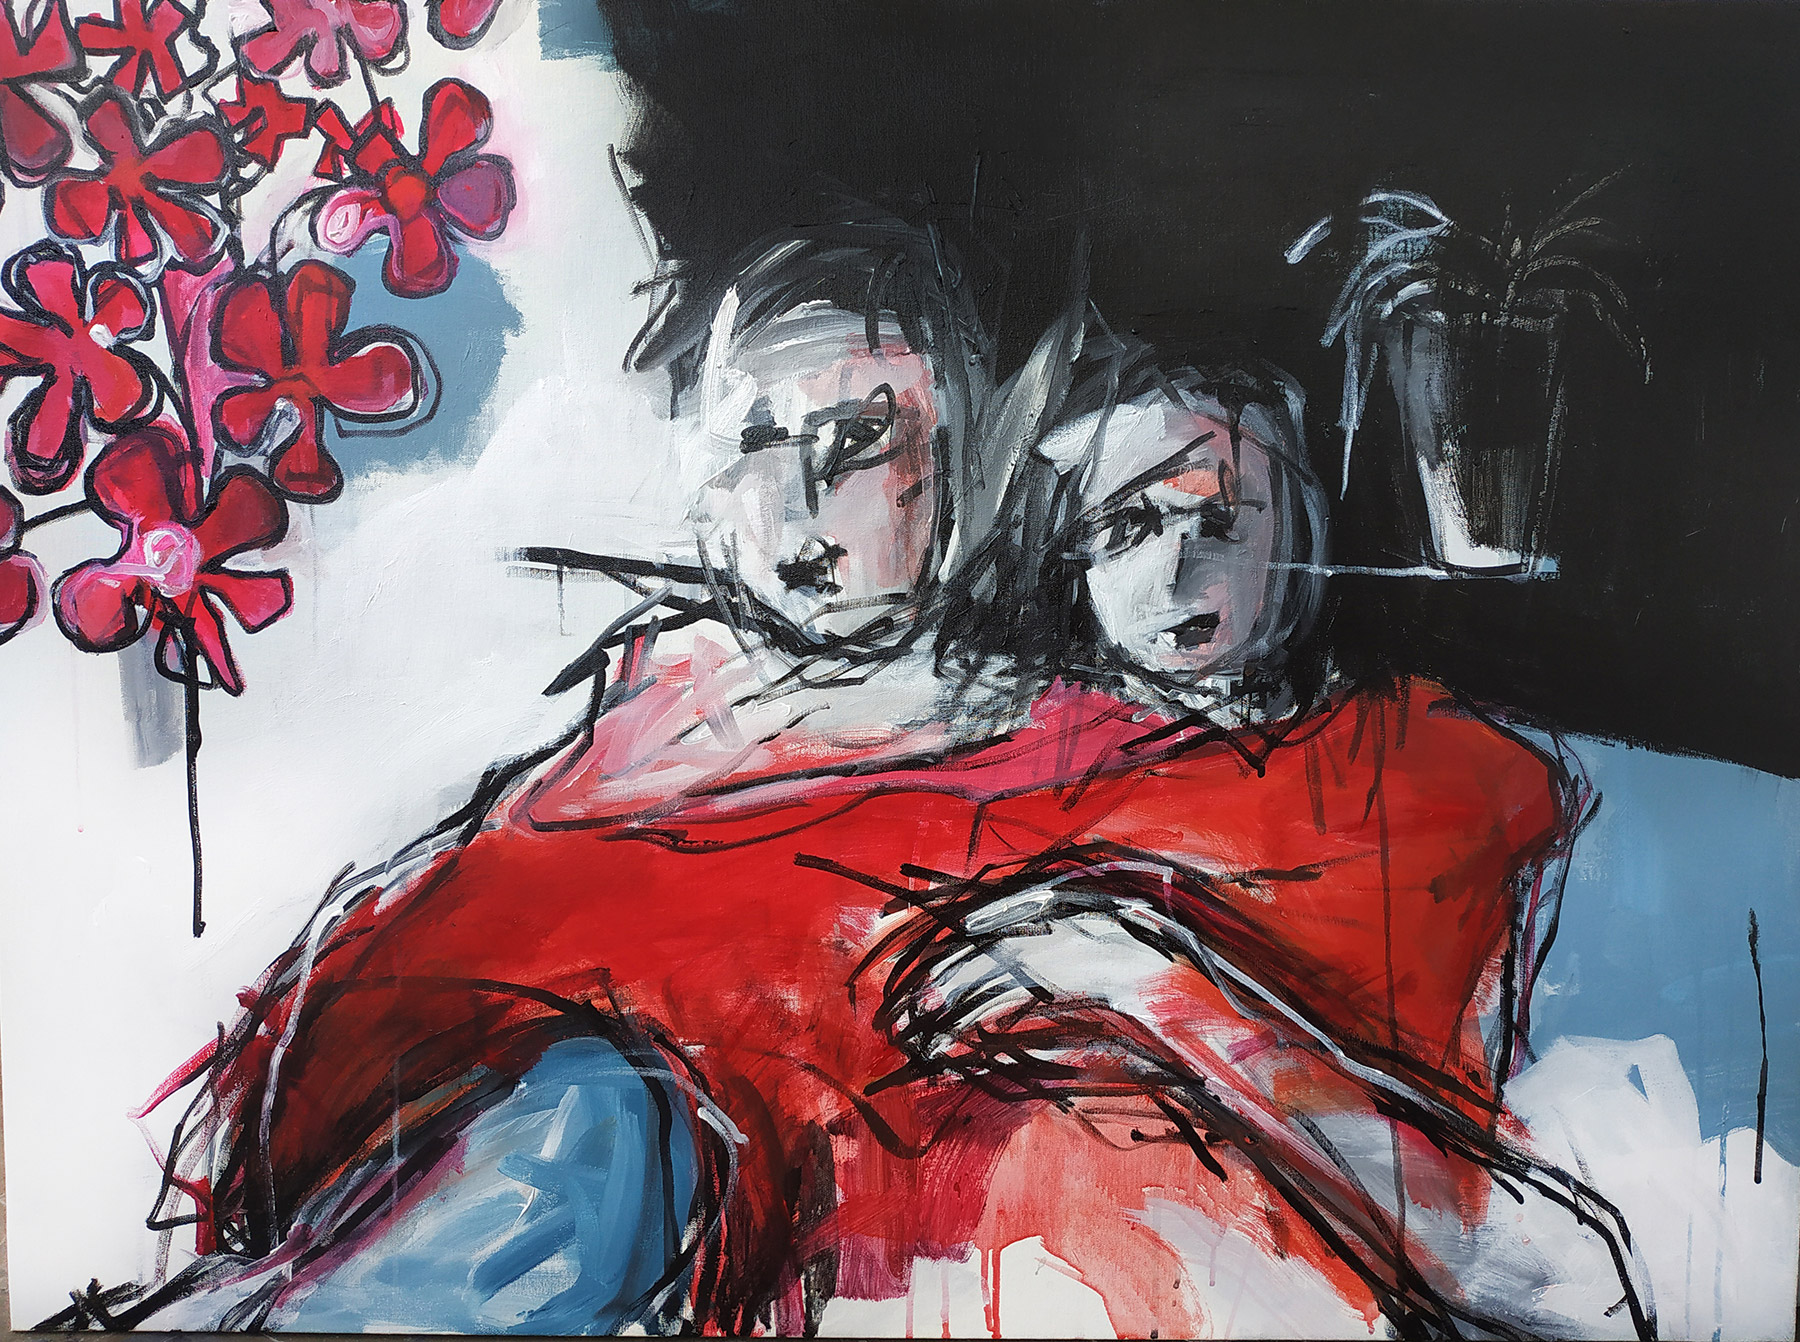 Father and Daughter in the Terrace, 75x100 cm, Acrylic on canvas, 2019